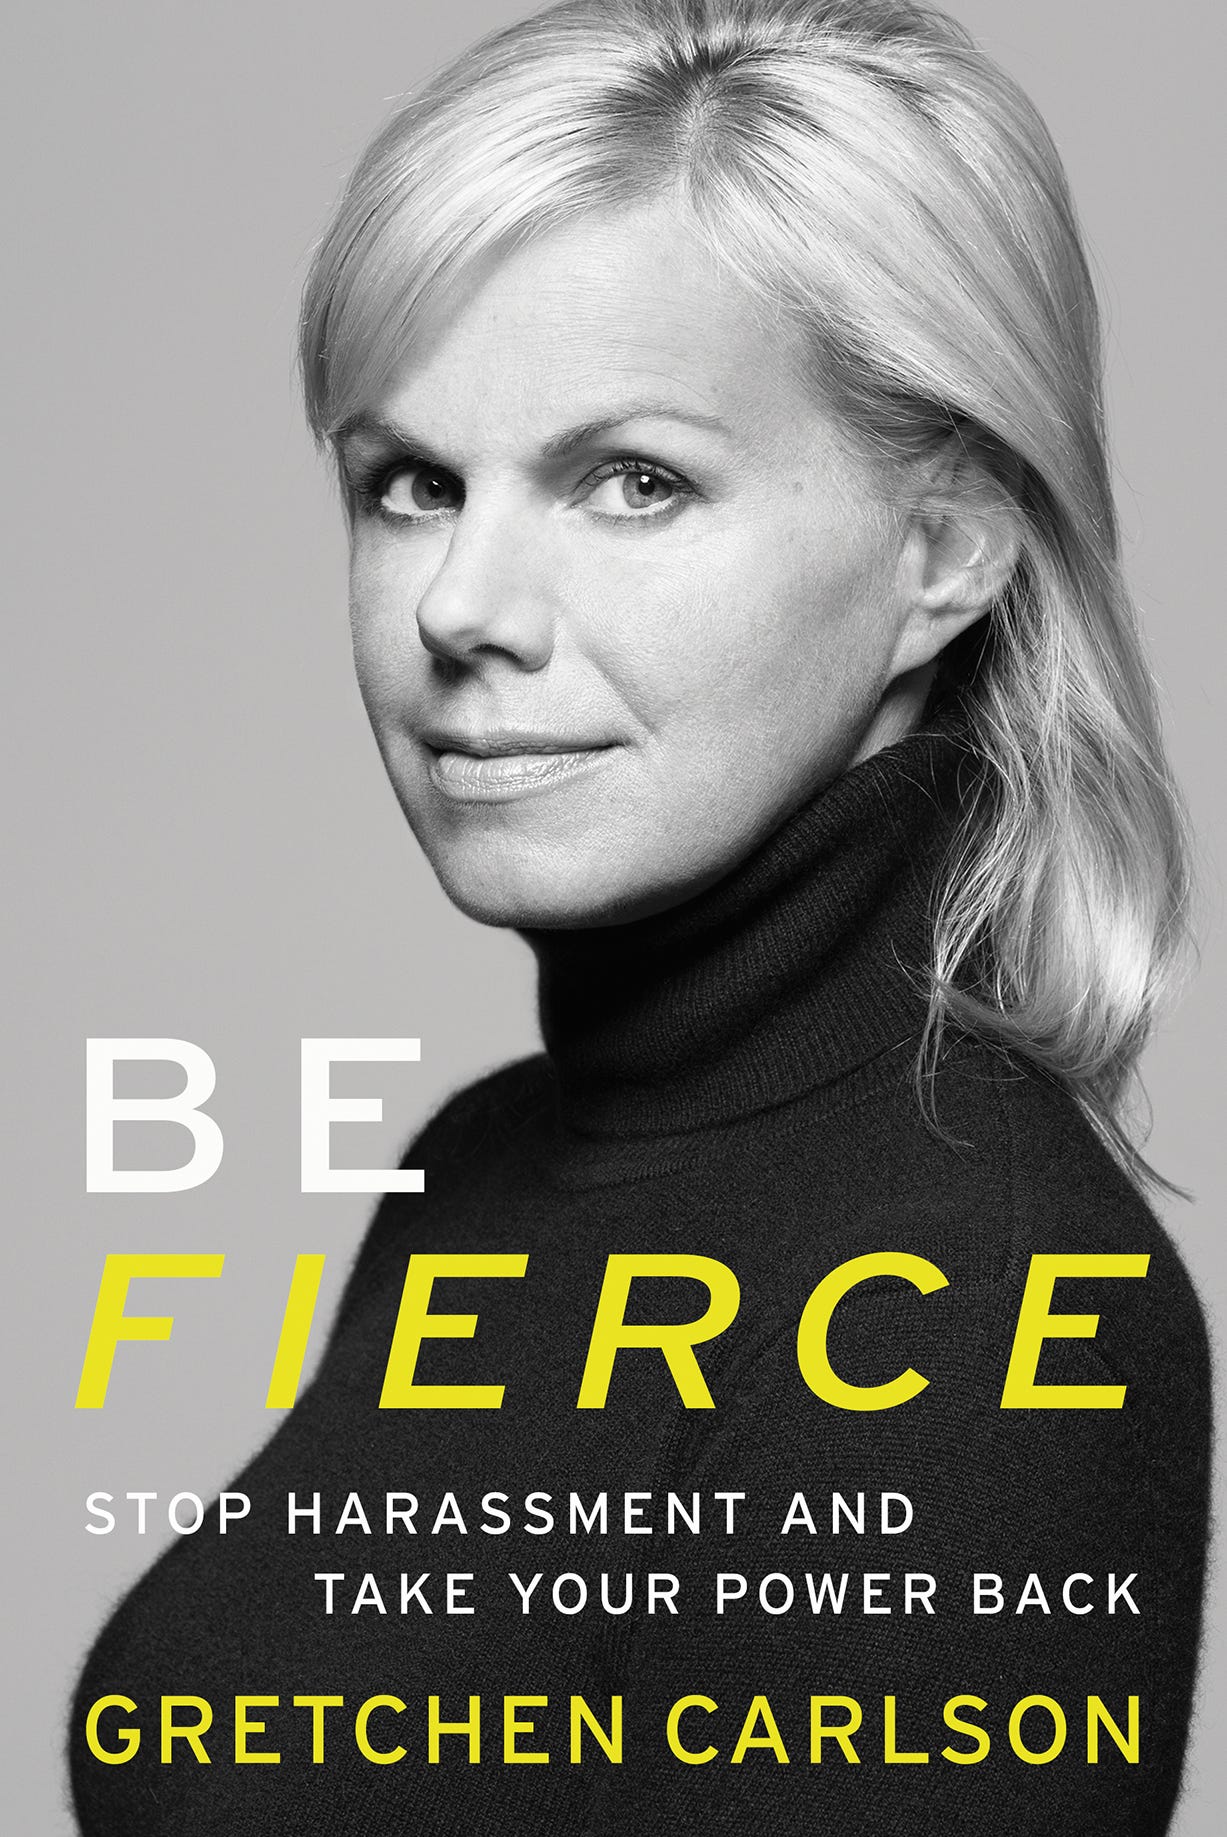 Gretchen Carlson takes on the &apos;shocking epidemic&apos; of sexual harassment in new book